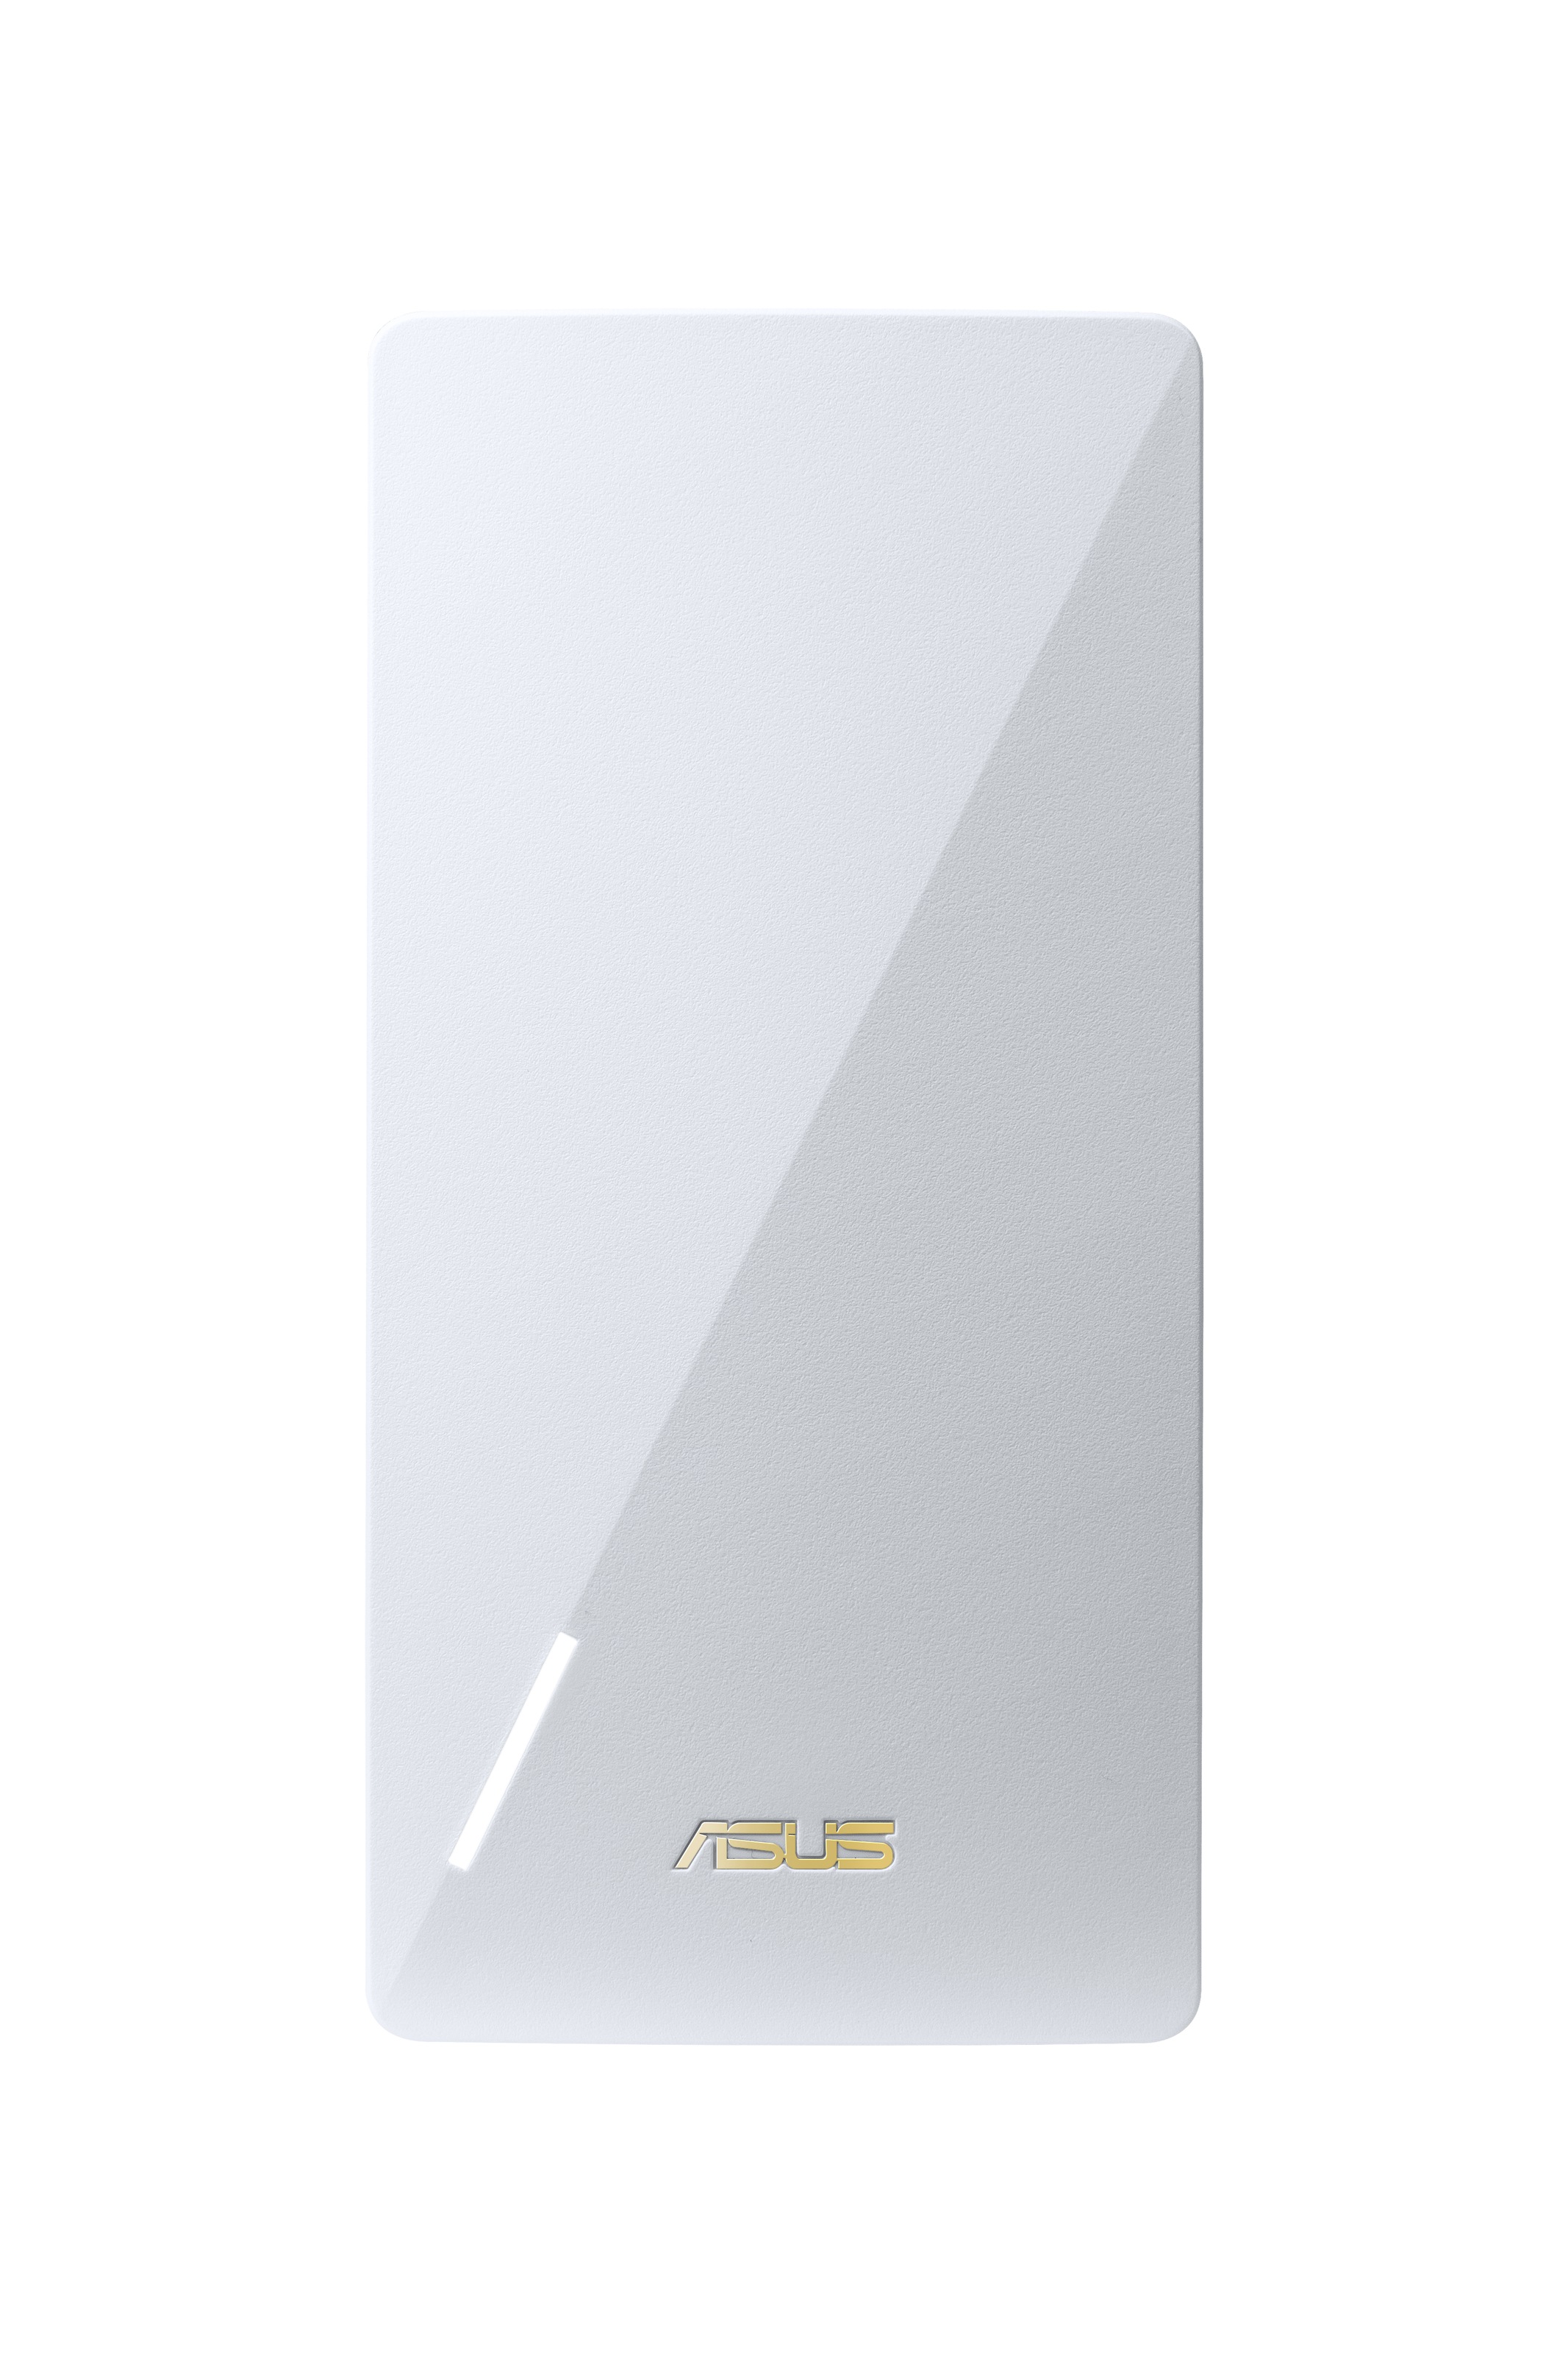 Asus WLAN-Router »WLAN Repeater Asus AX3000 RP-AX58«